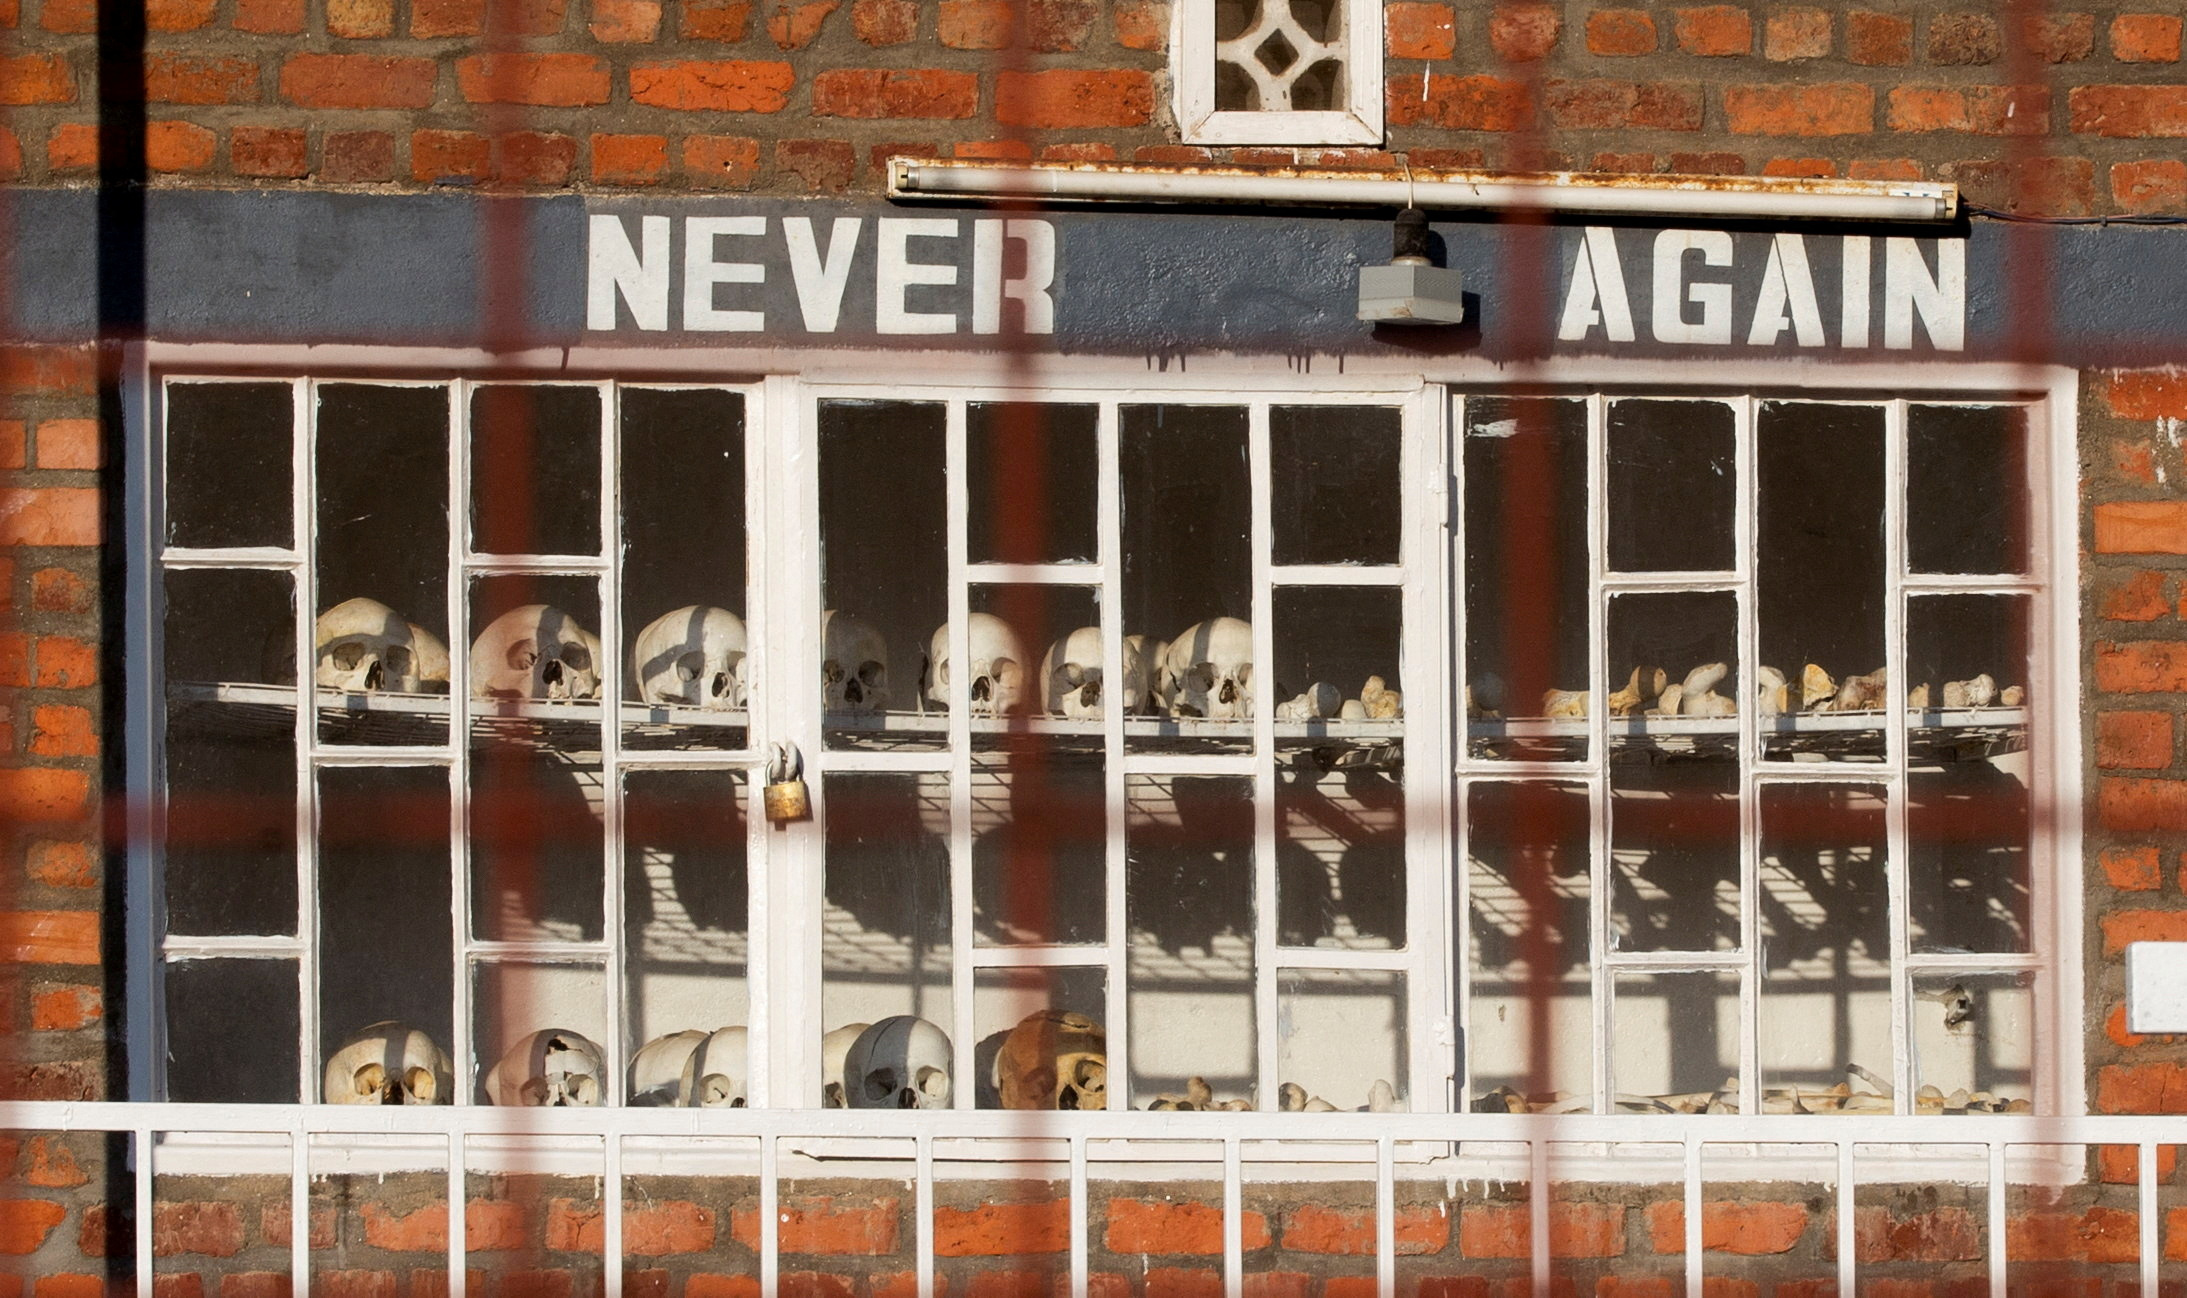 Skulls of people who died during the 1994 Rwandan genocide are arranged and locked outside the St. Pierre Catholic Church, in Kibuye, Karongo city center, Karongi distric